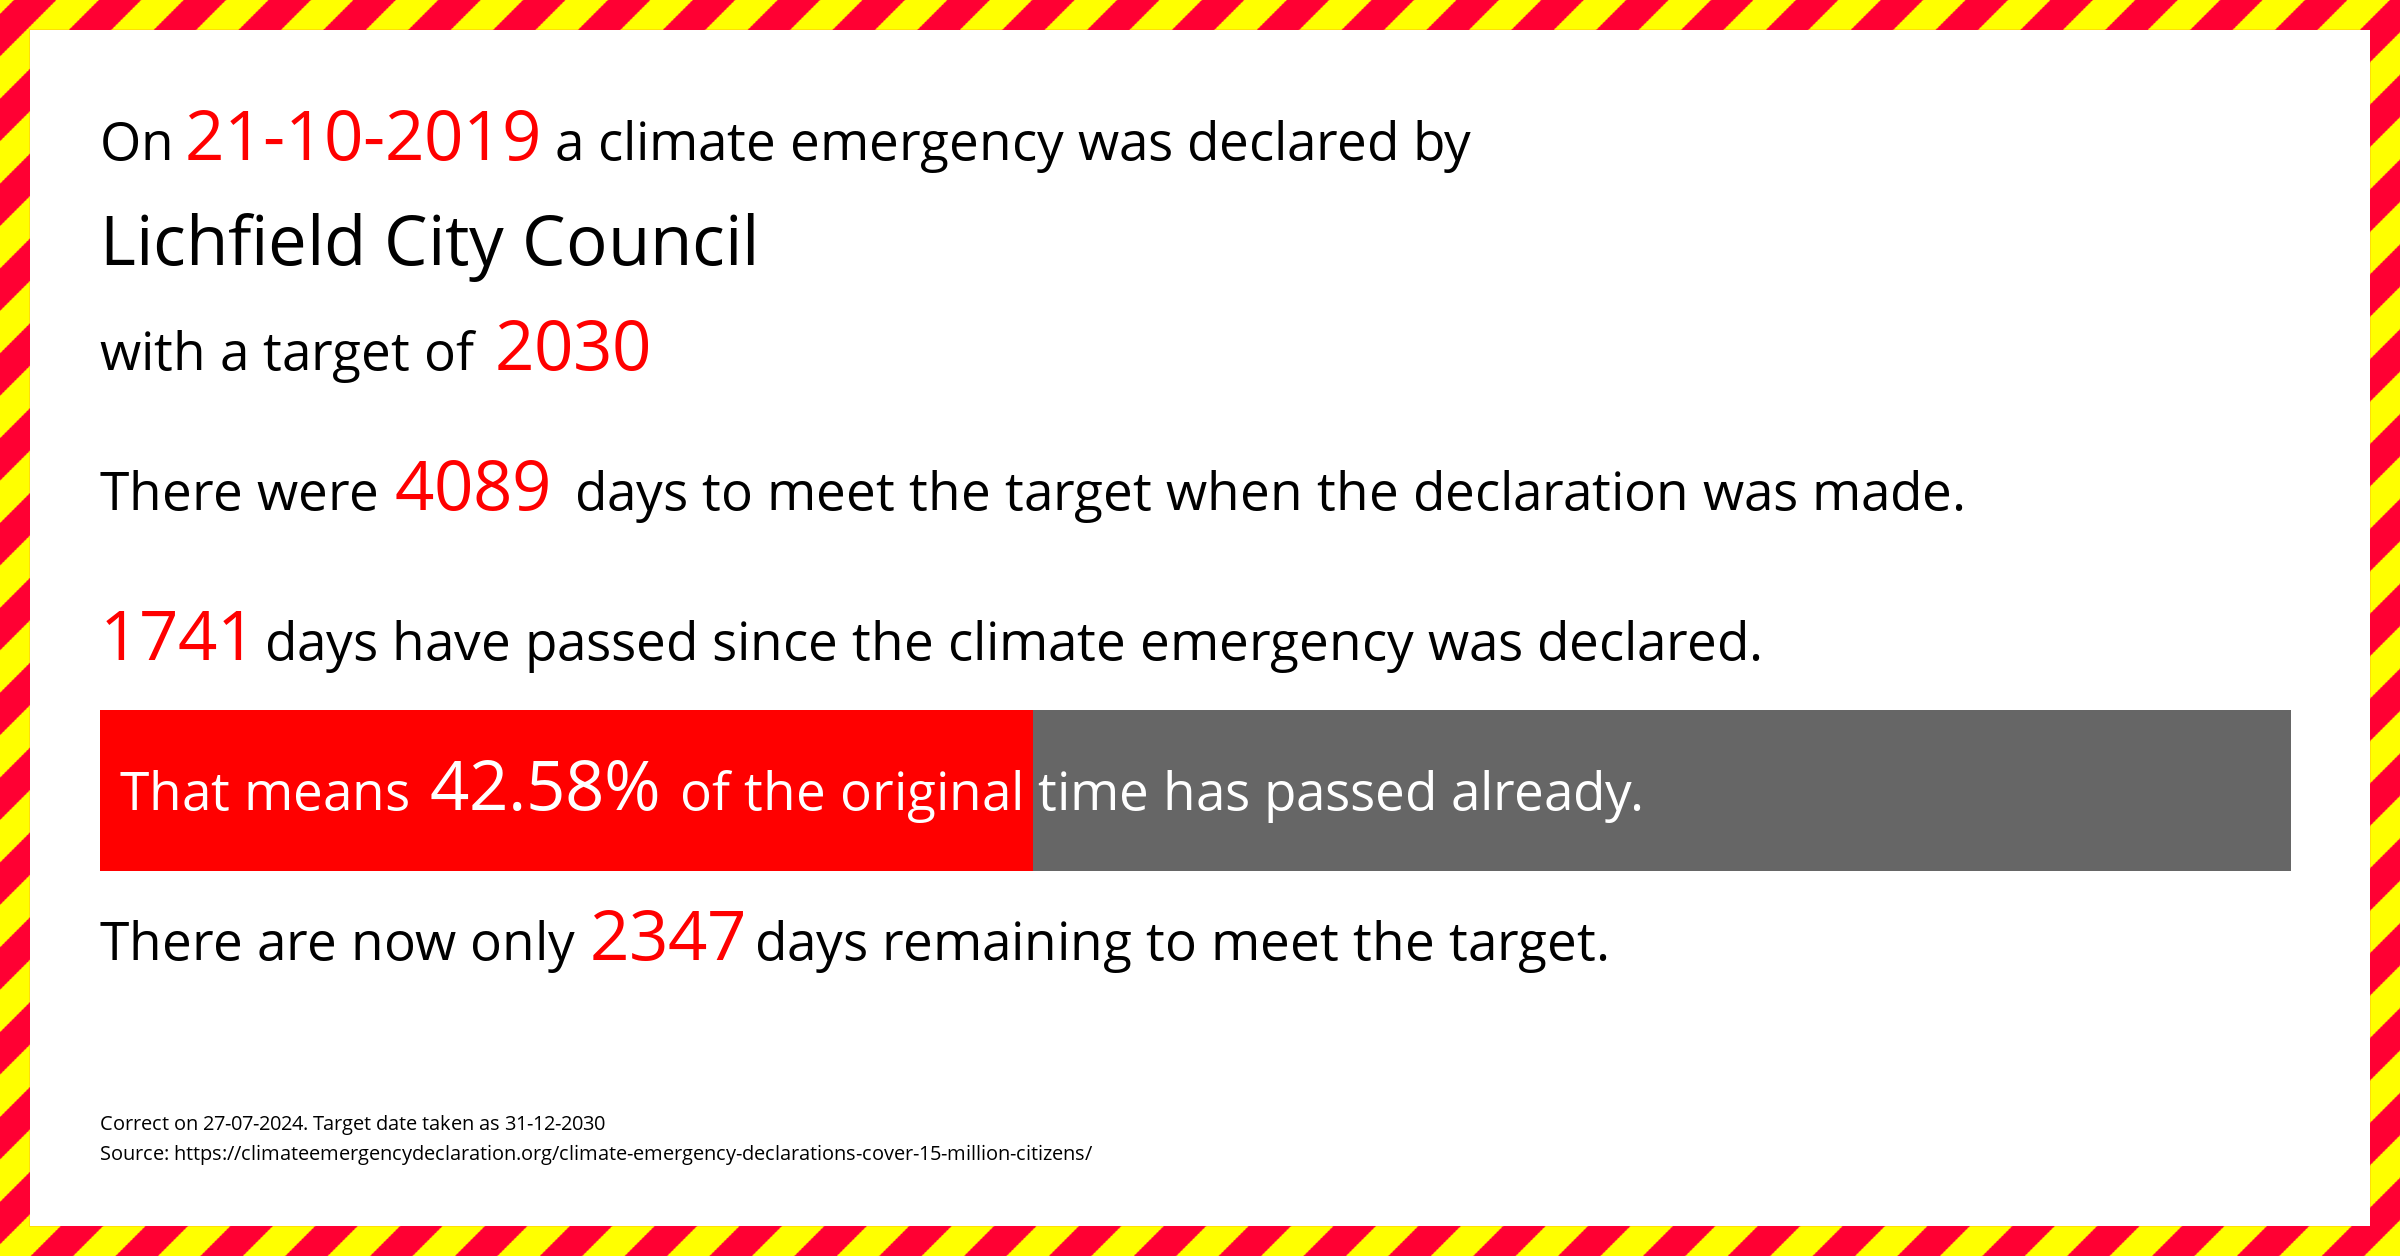 Lichfield City Council declared a Climate emergency on Monday 21st October 2019, with a target of 2030.